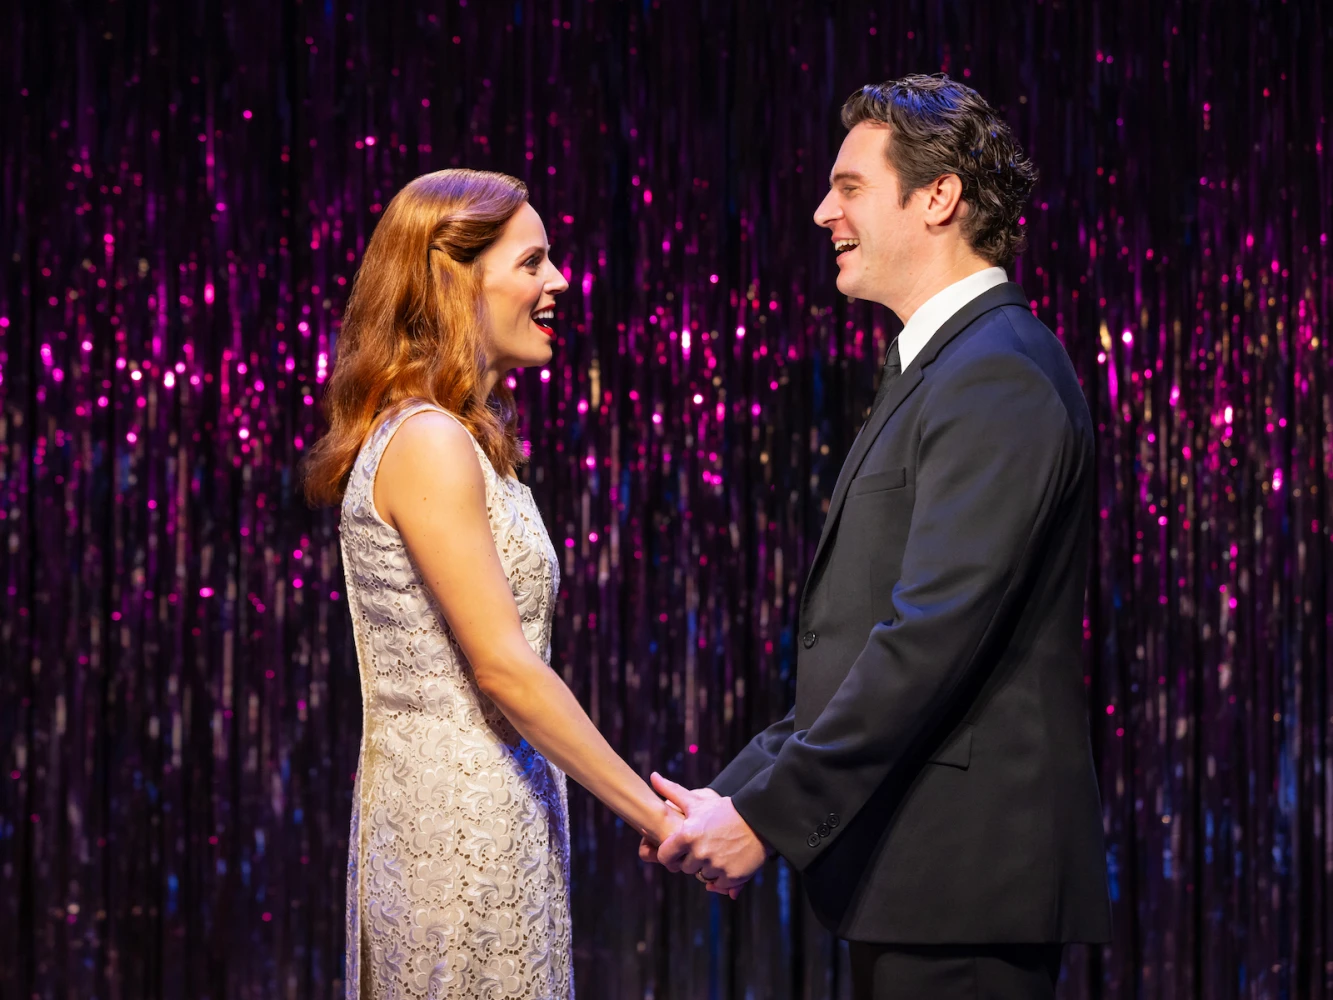 Merrily We Roll Along on Broadway: What to expect - 7